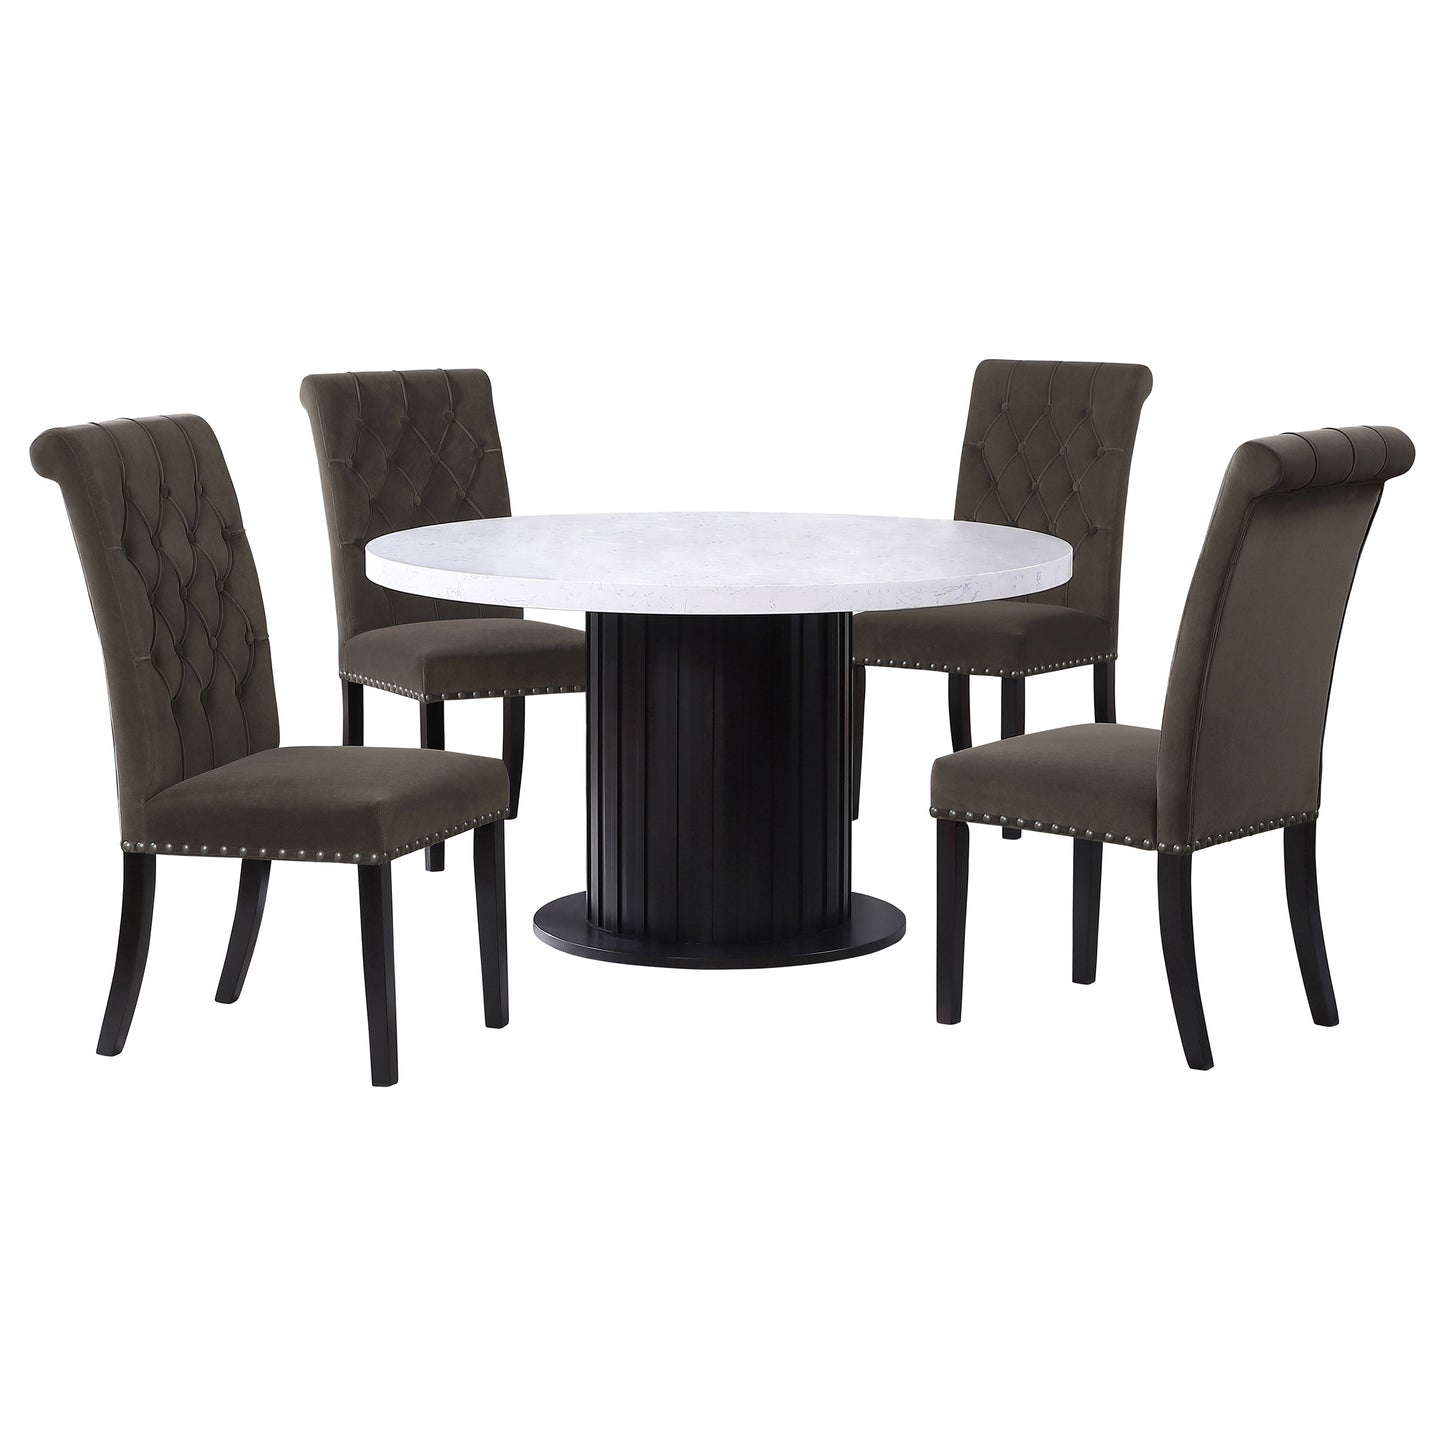 Sherry 5-piece Round Dining Set with Brown Velvet Chairs